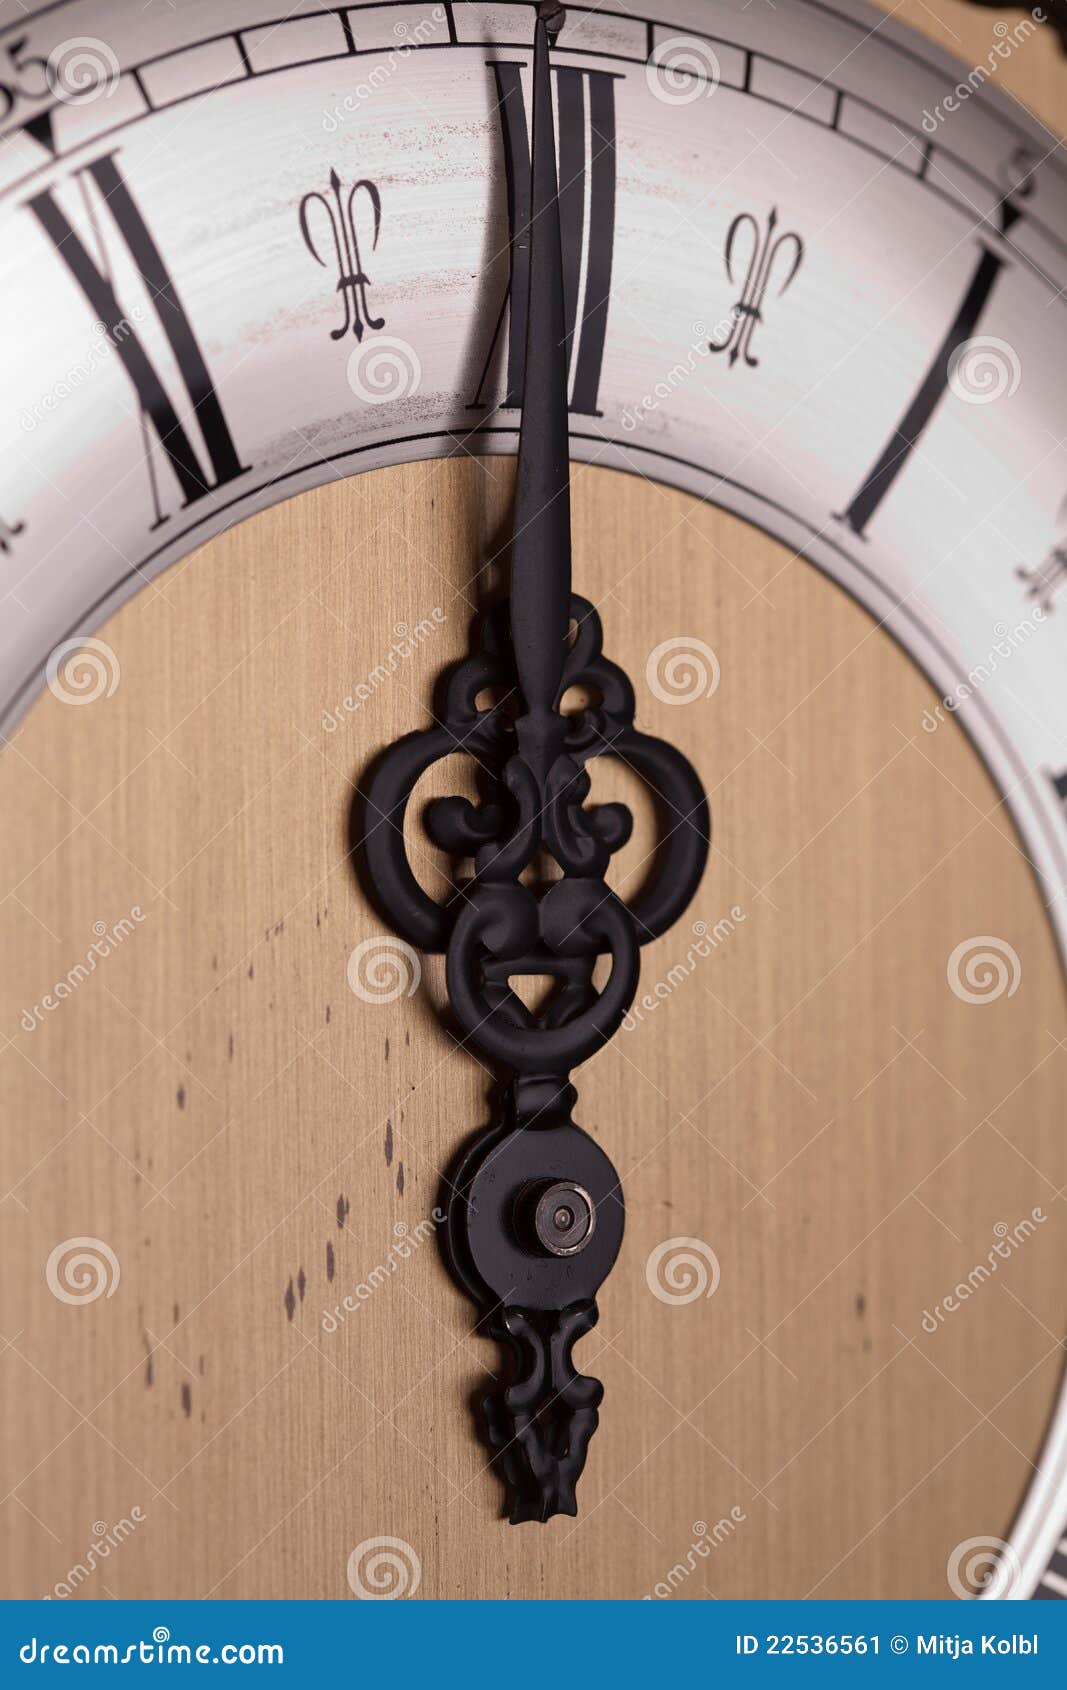 Clock 2pm Stock Photos - Free & Royalty-Free Stock Photos from Dreamstime